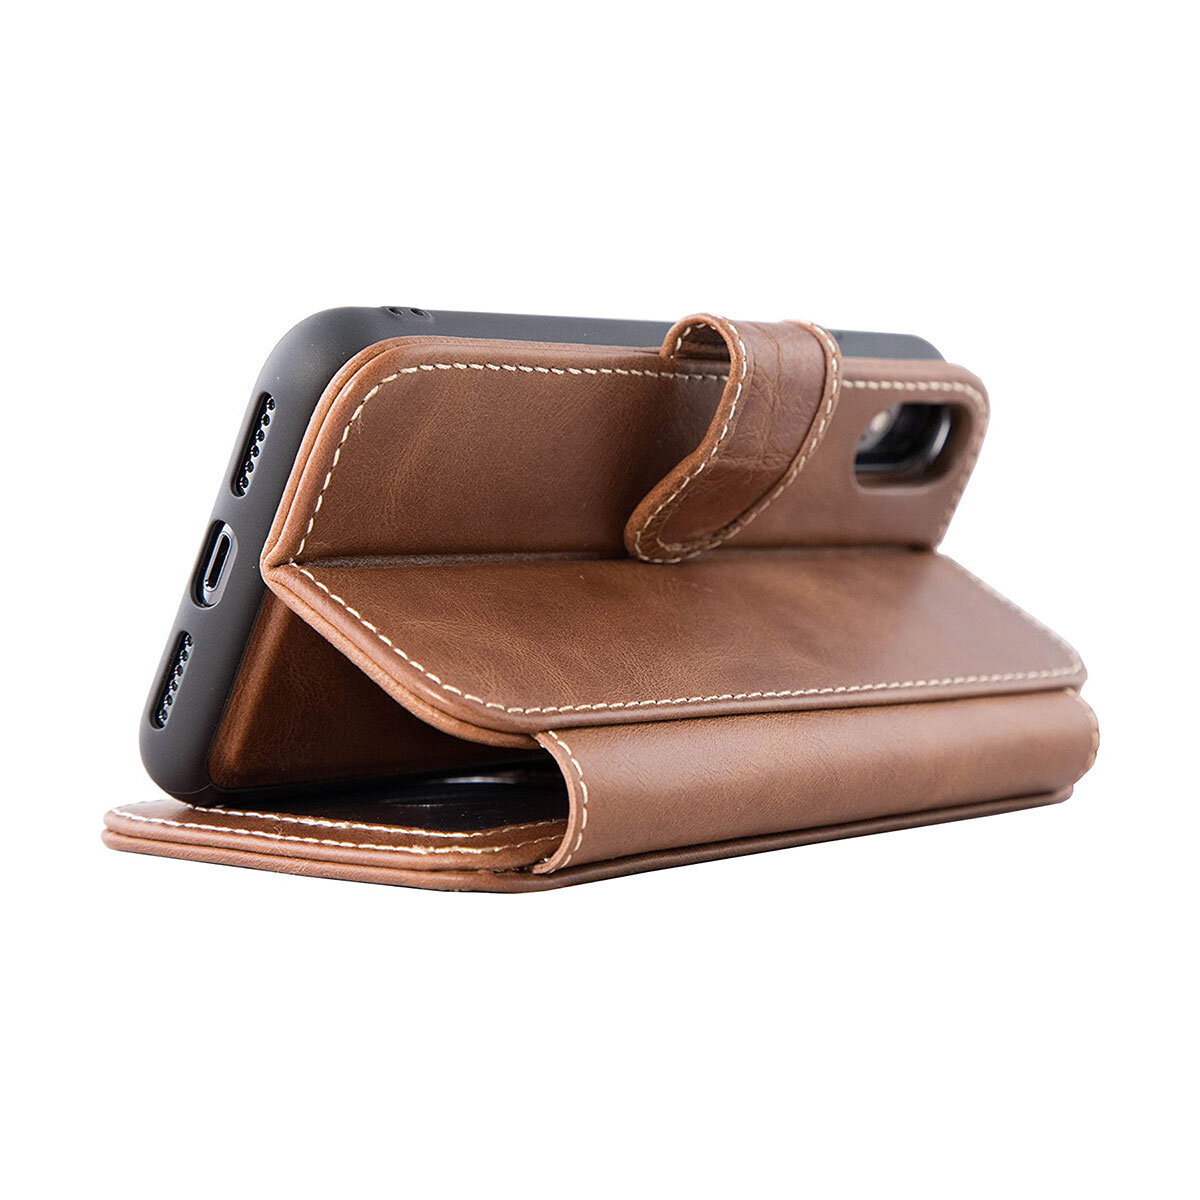 Wilken Leather iPhone Crossbody Phone Case with Wallet and Purse | Holds Cash, Credit Cards, and More in Zipper Pouch